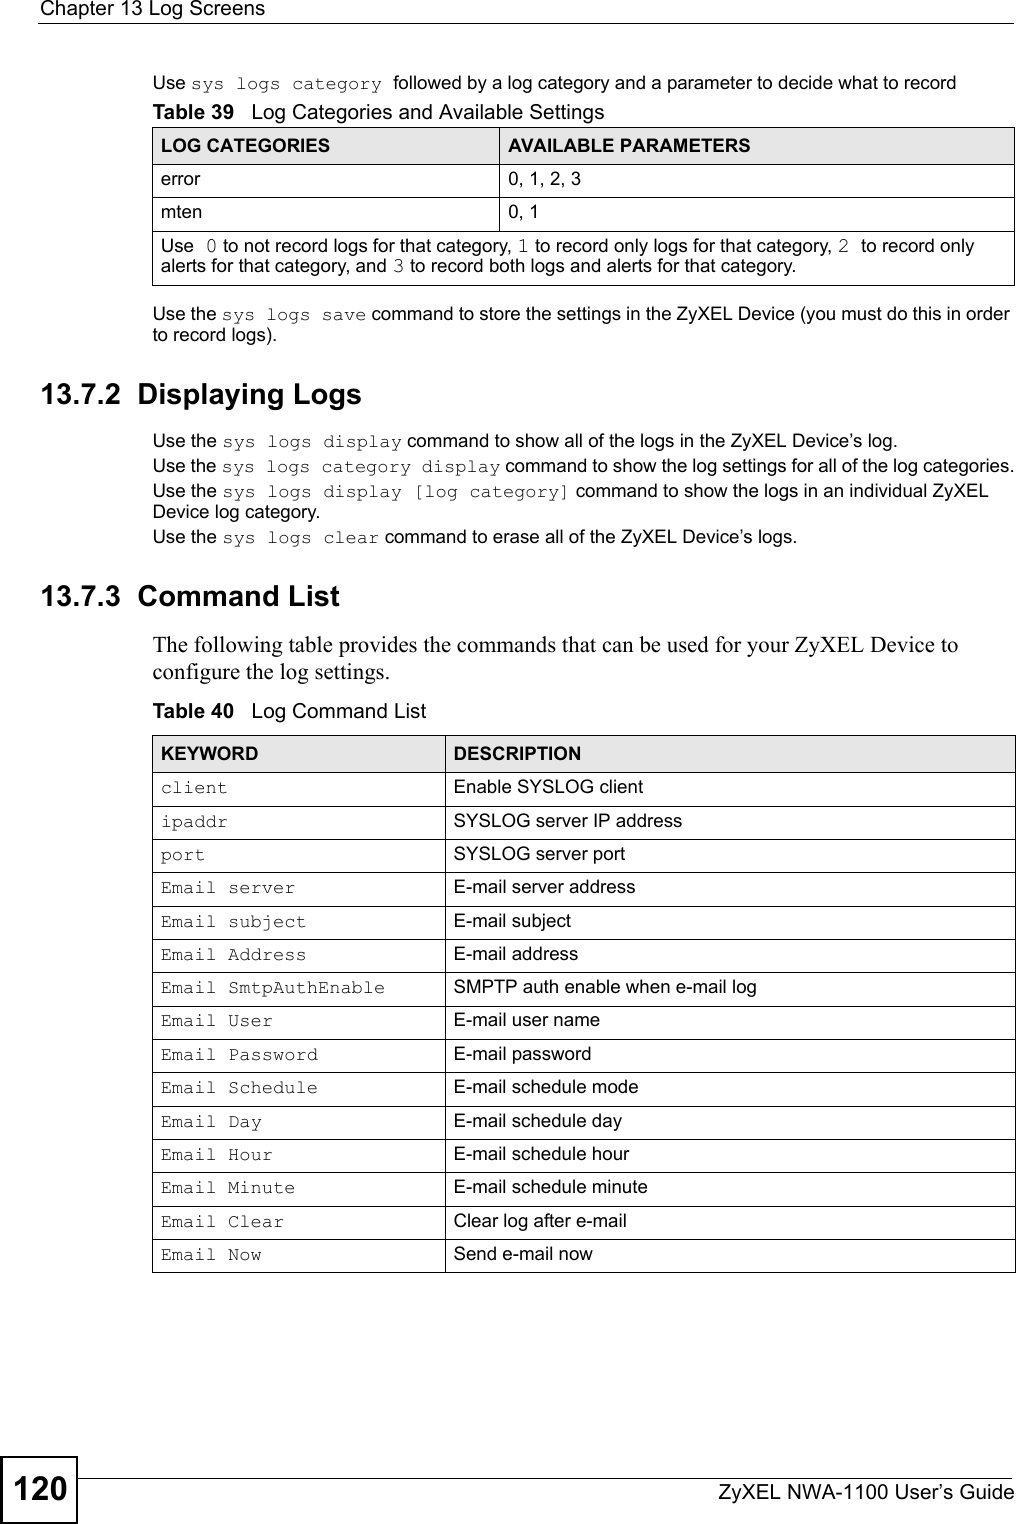 Chapter 13 Log ScreensZyXEL NWA-1100 User’s Guide120Use sys logs category followed by a log category and a parameter to decide what to record Use the sys logs save command to store the settings in the ZyXEL Device (you must do this in order to record logs).13.7.2  Displaying LogsUse the sys logs display command to show all of the logs in the ZyXEL Device’s log.Use the sys logs category display command to show the log settings for all of the log categories.Use the sys logs display [log category] command to show the logs in an individual ZyXEL Device log category.Use the sys logs clear command to erase all of the ZyXEL Device’s logs.13.7.3  Command ListThe following table provides the commands that can be used for your ZyXEL Device to configure the log settings.Table 40   Log Command ListTable 39   Log Categories and Available SettingsLOG CATEGORIES AVAILABLE PARAMETERSerror 0, 1, 2, 3mten 0, 1Use 0 to not record logs for that category, 1 to record only logs for that category, 2 to record only alerts for that category, and 3 to record both logs and alerts for that category.KEYWORD DESCRIPTIONclient Enable SYSLOG clientipaddr SYSLOG server IP addressport  SYSLOG server port Email server E-mail server addressEmail subject E-mail subjectEmail Address E-mail addressEmail SmtpAuthEnable SMPTP auth enable when e-mail logEmail User E-mail user nameEmail Password E-mail passwordEmail Schedule E-mail schedule modeEmail Day E-mail schedule dayEmail Hour E-mail schedule hourEmail Minute E-mail schedule minuteEmail Clear Clear log after e-mailEmail Now Send e-mail now